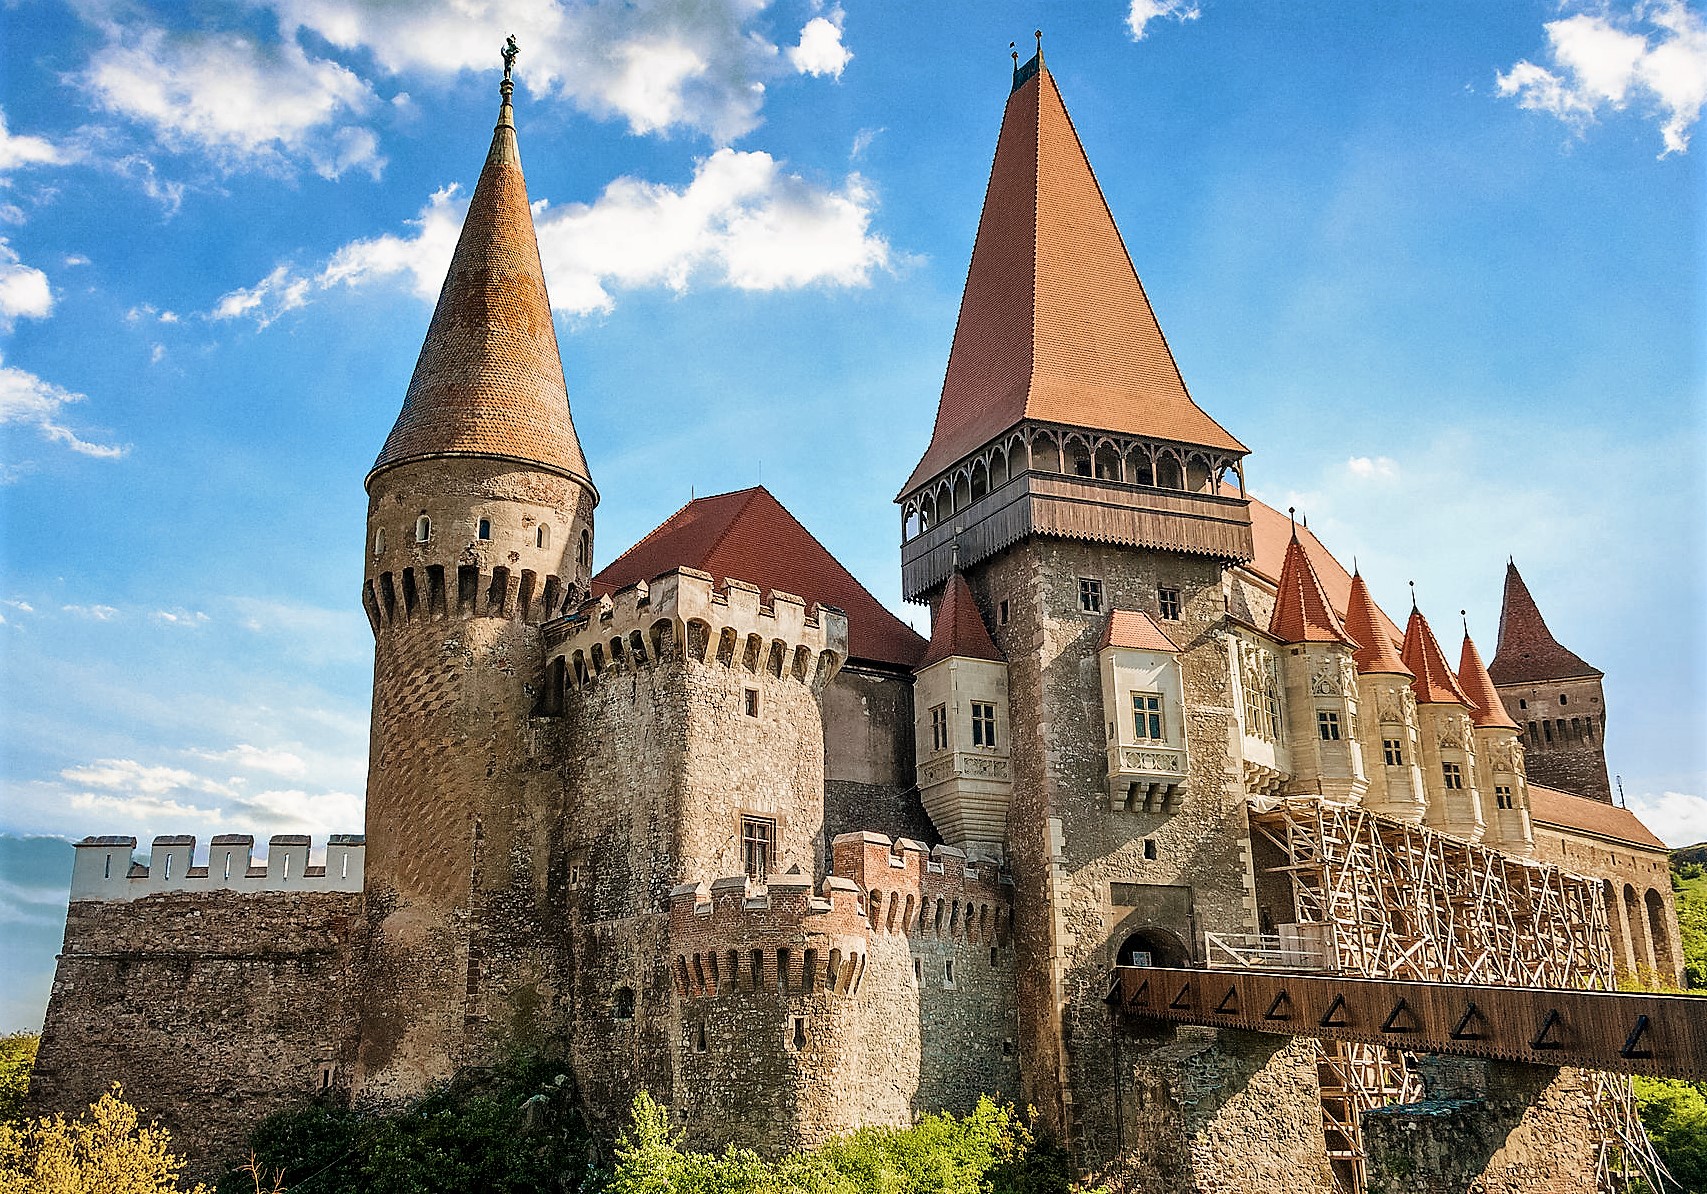 Corvin Castle Pics, Man Made Collection